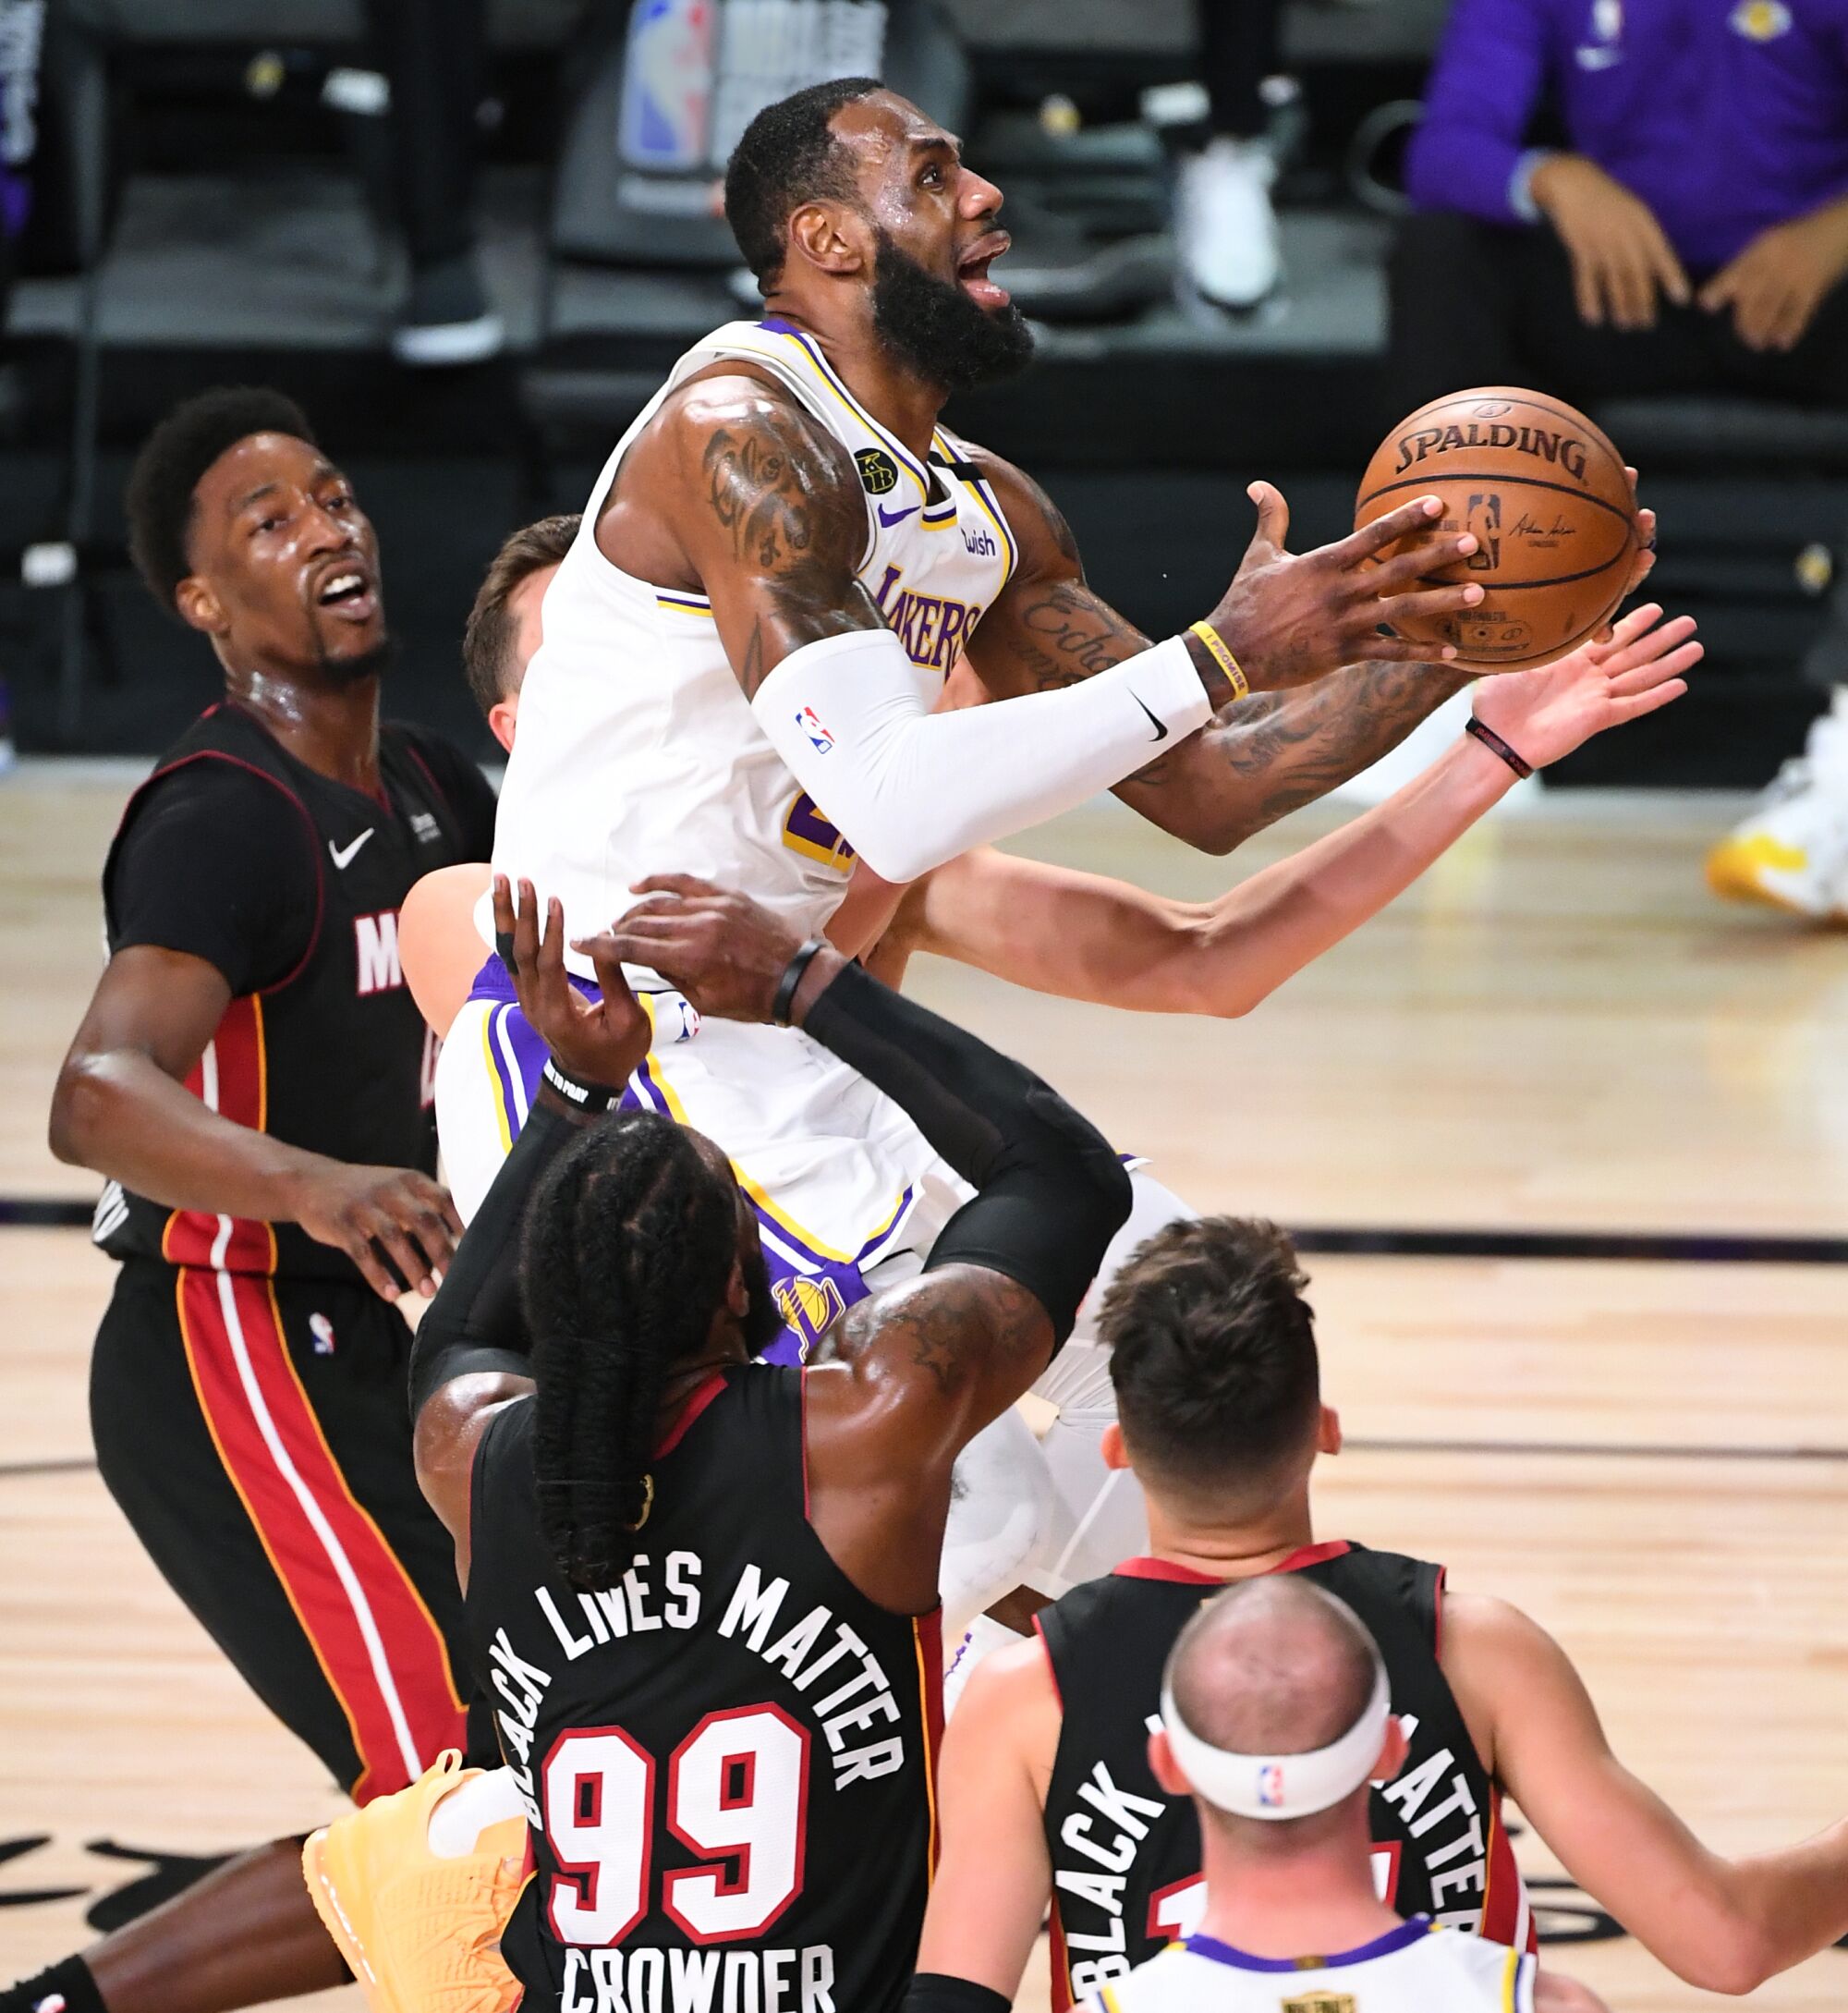 Lakers forward LeBron James puts up a shot over the Miami Heat.